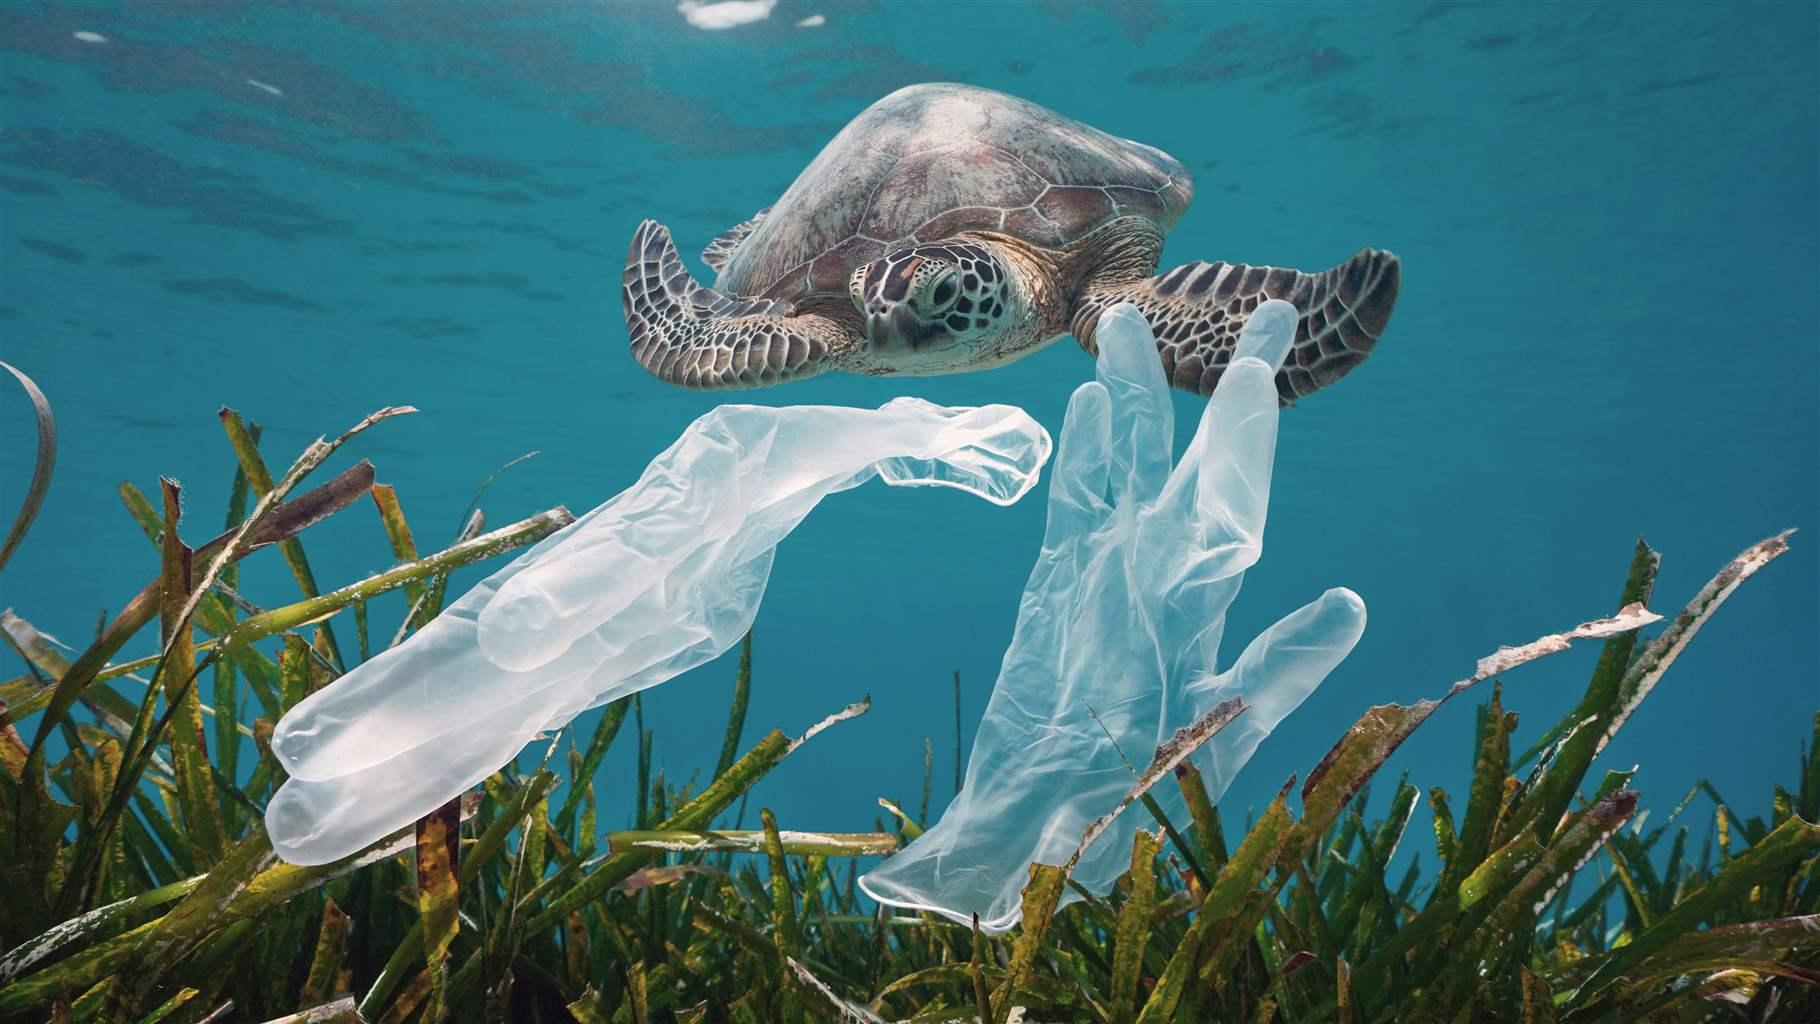 President Biden Can Lead on Ending Plastic Pollution of Our Ocean ...